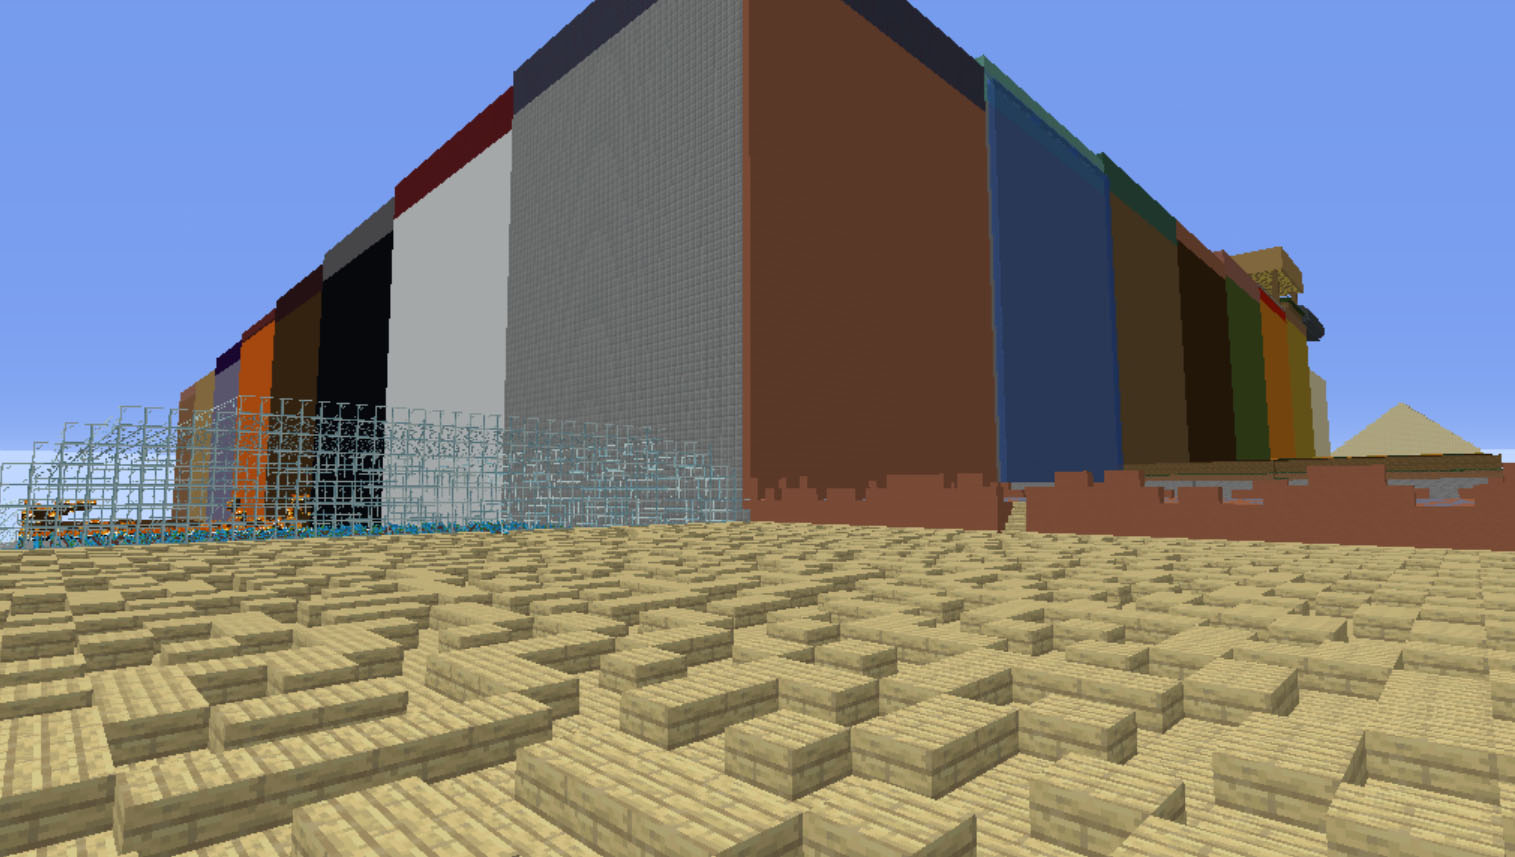 A huge square builing overlooking a wooden maze in Minecraft